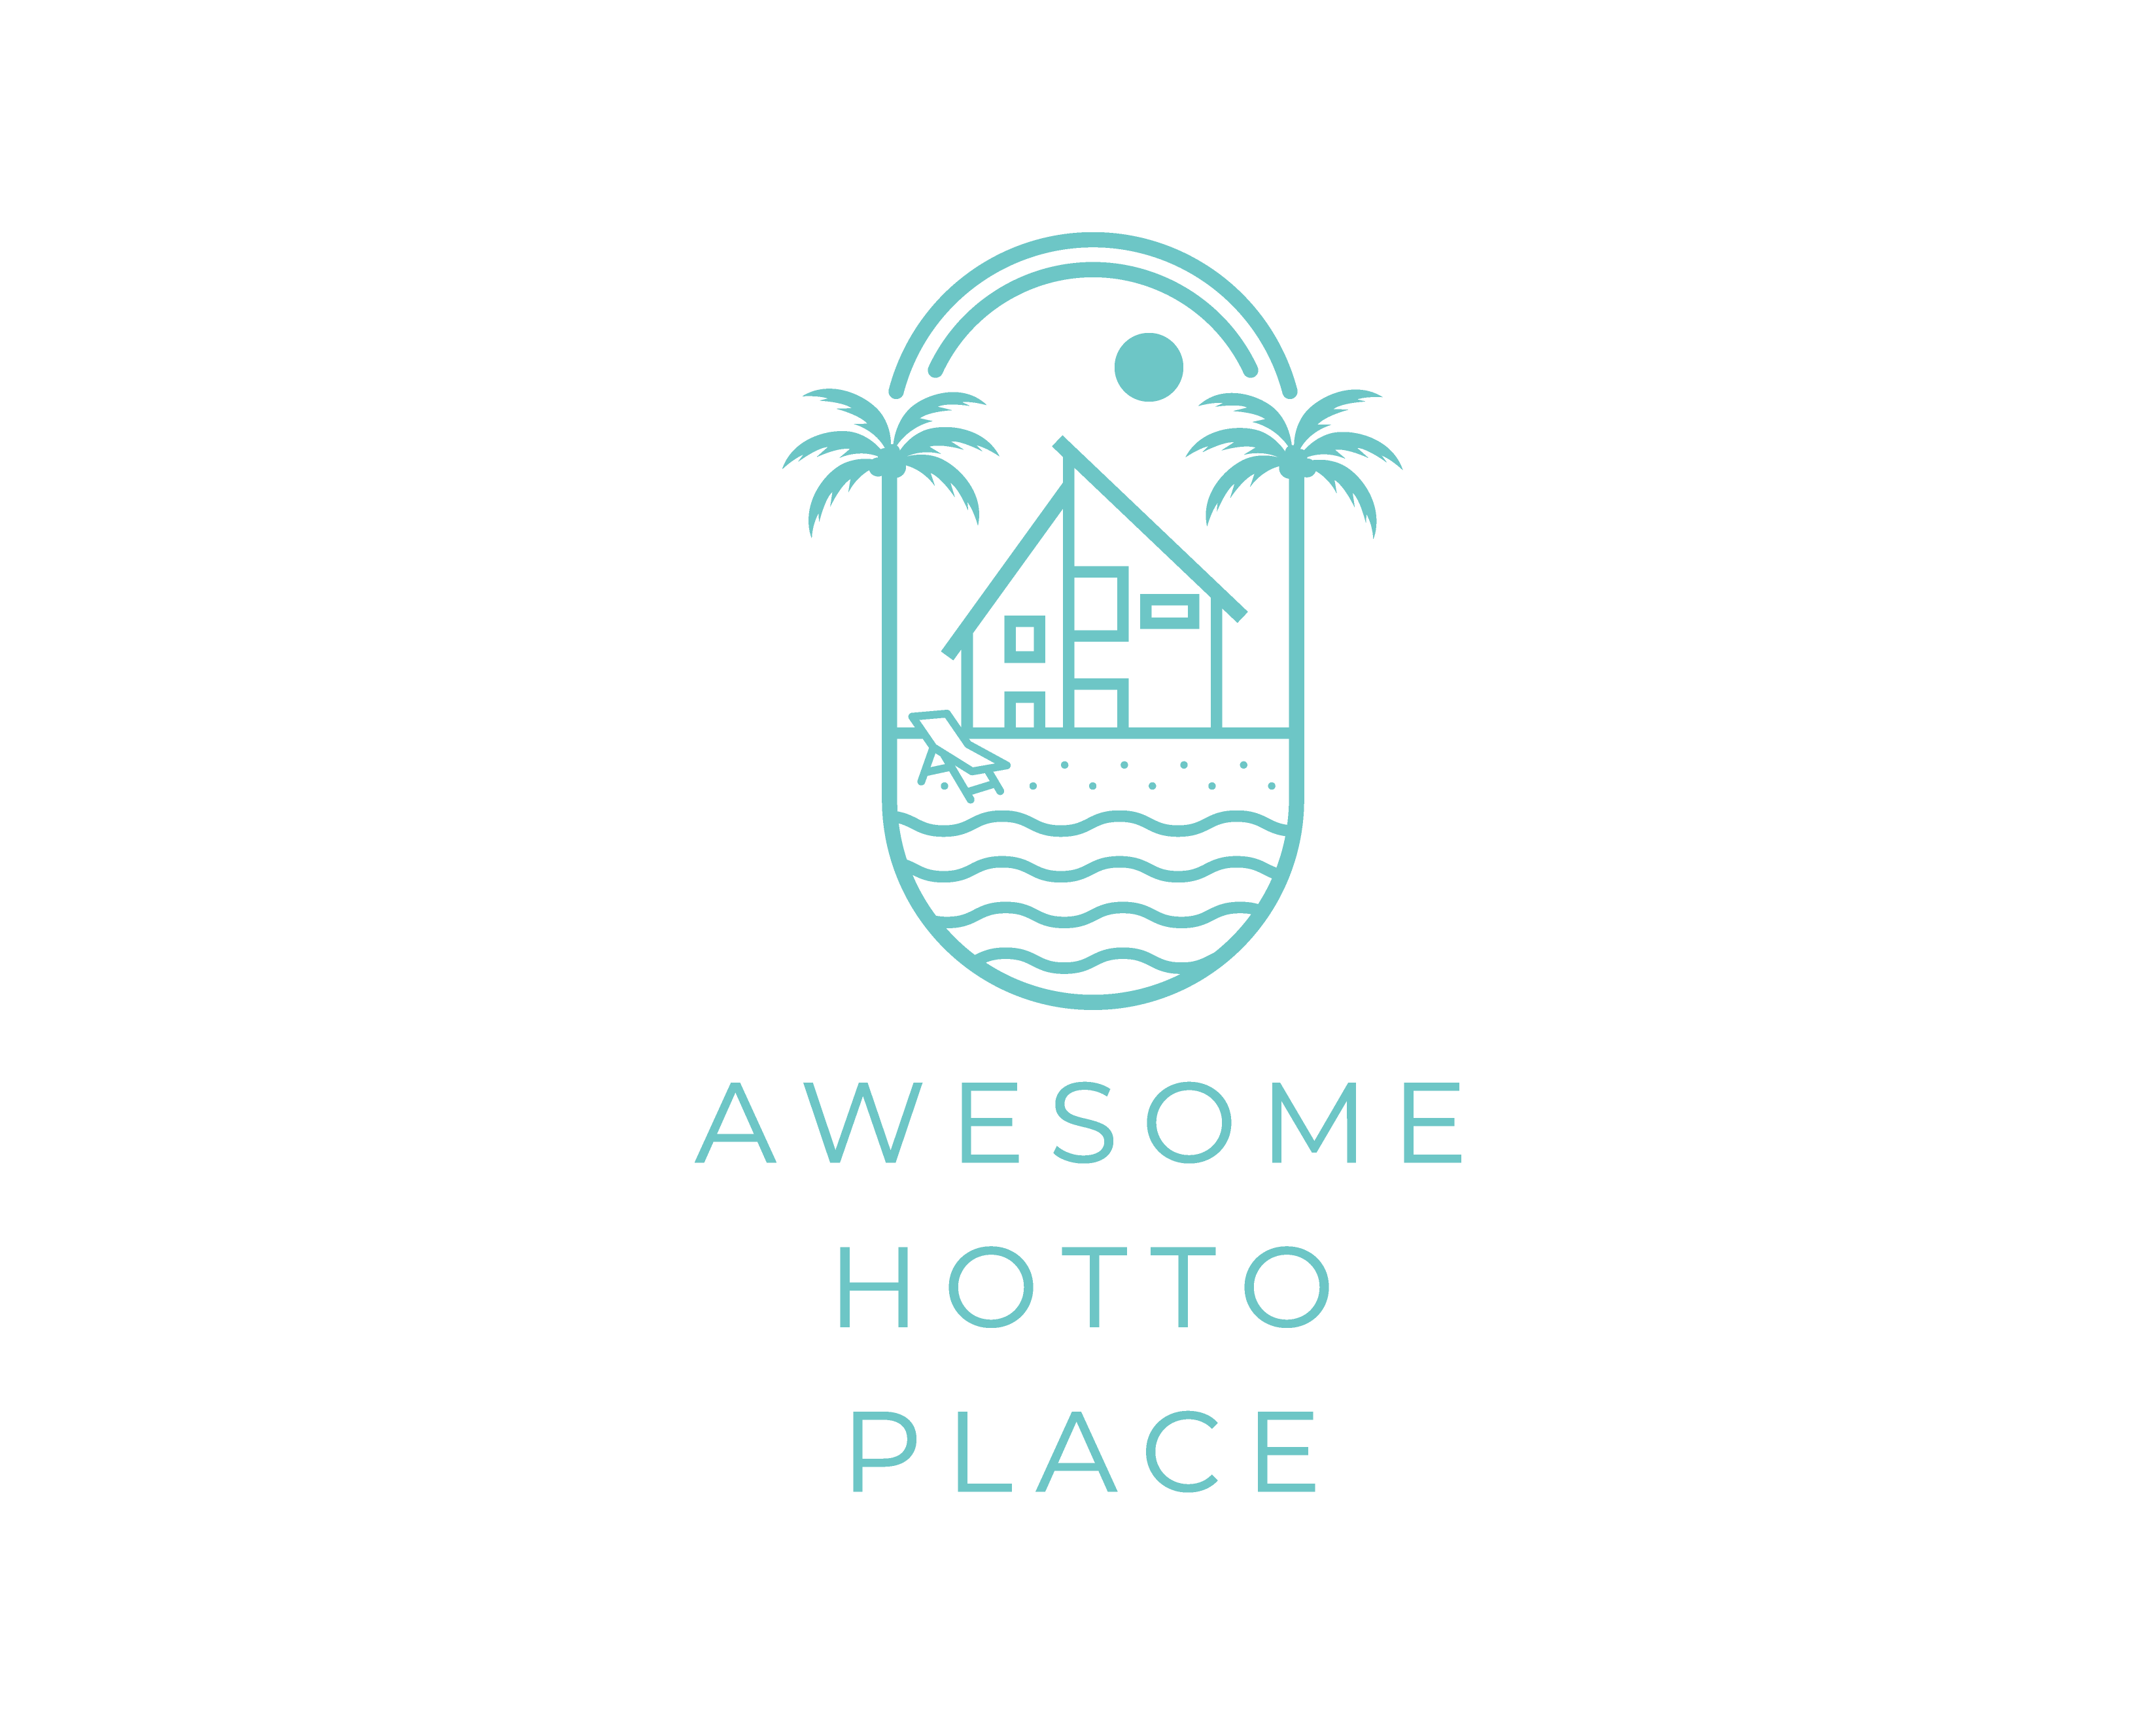 AWESOME HOTTO PLACEのロゴ